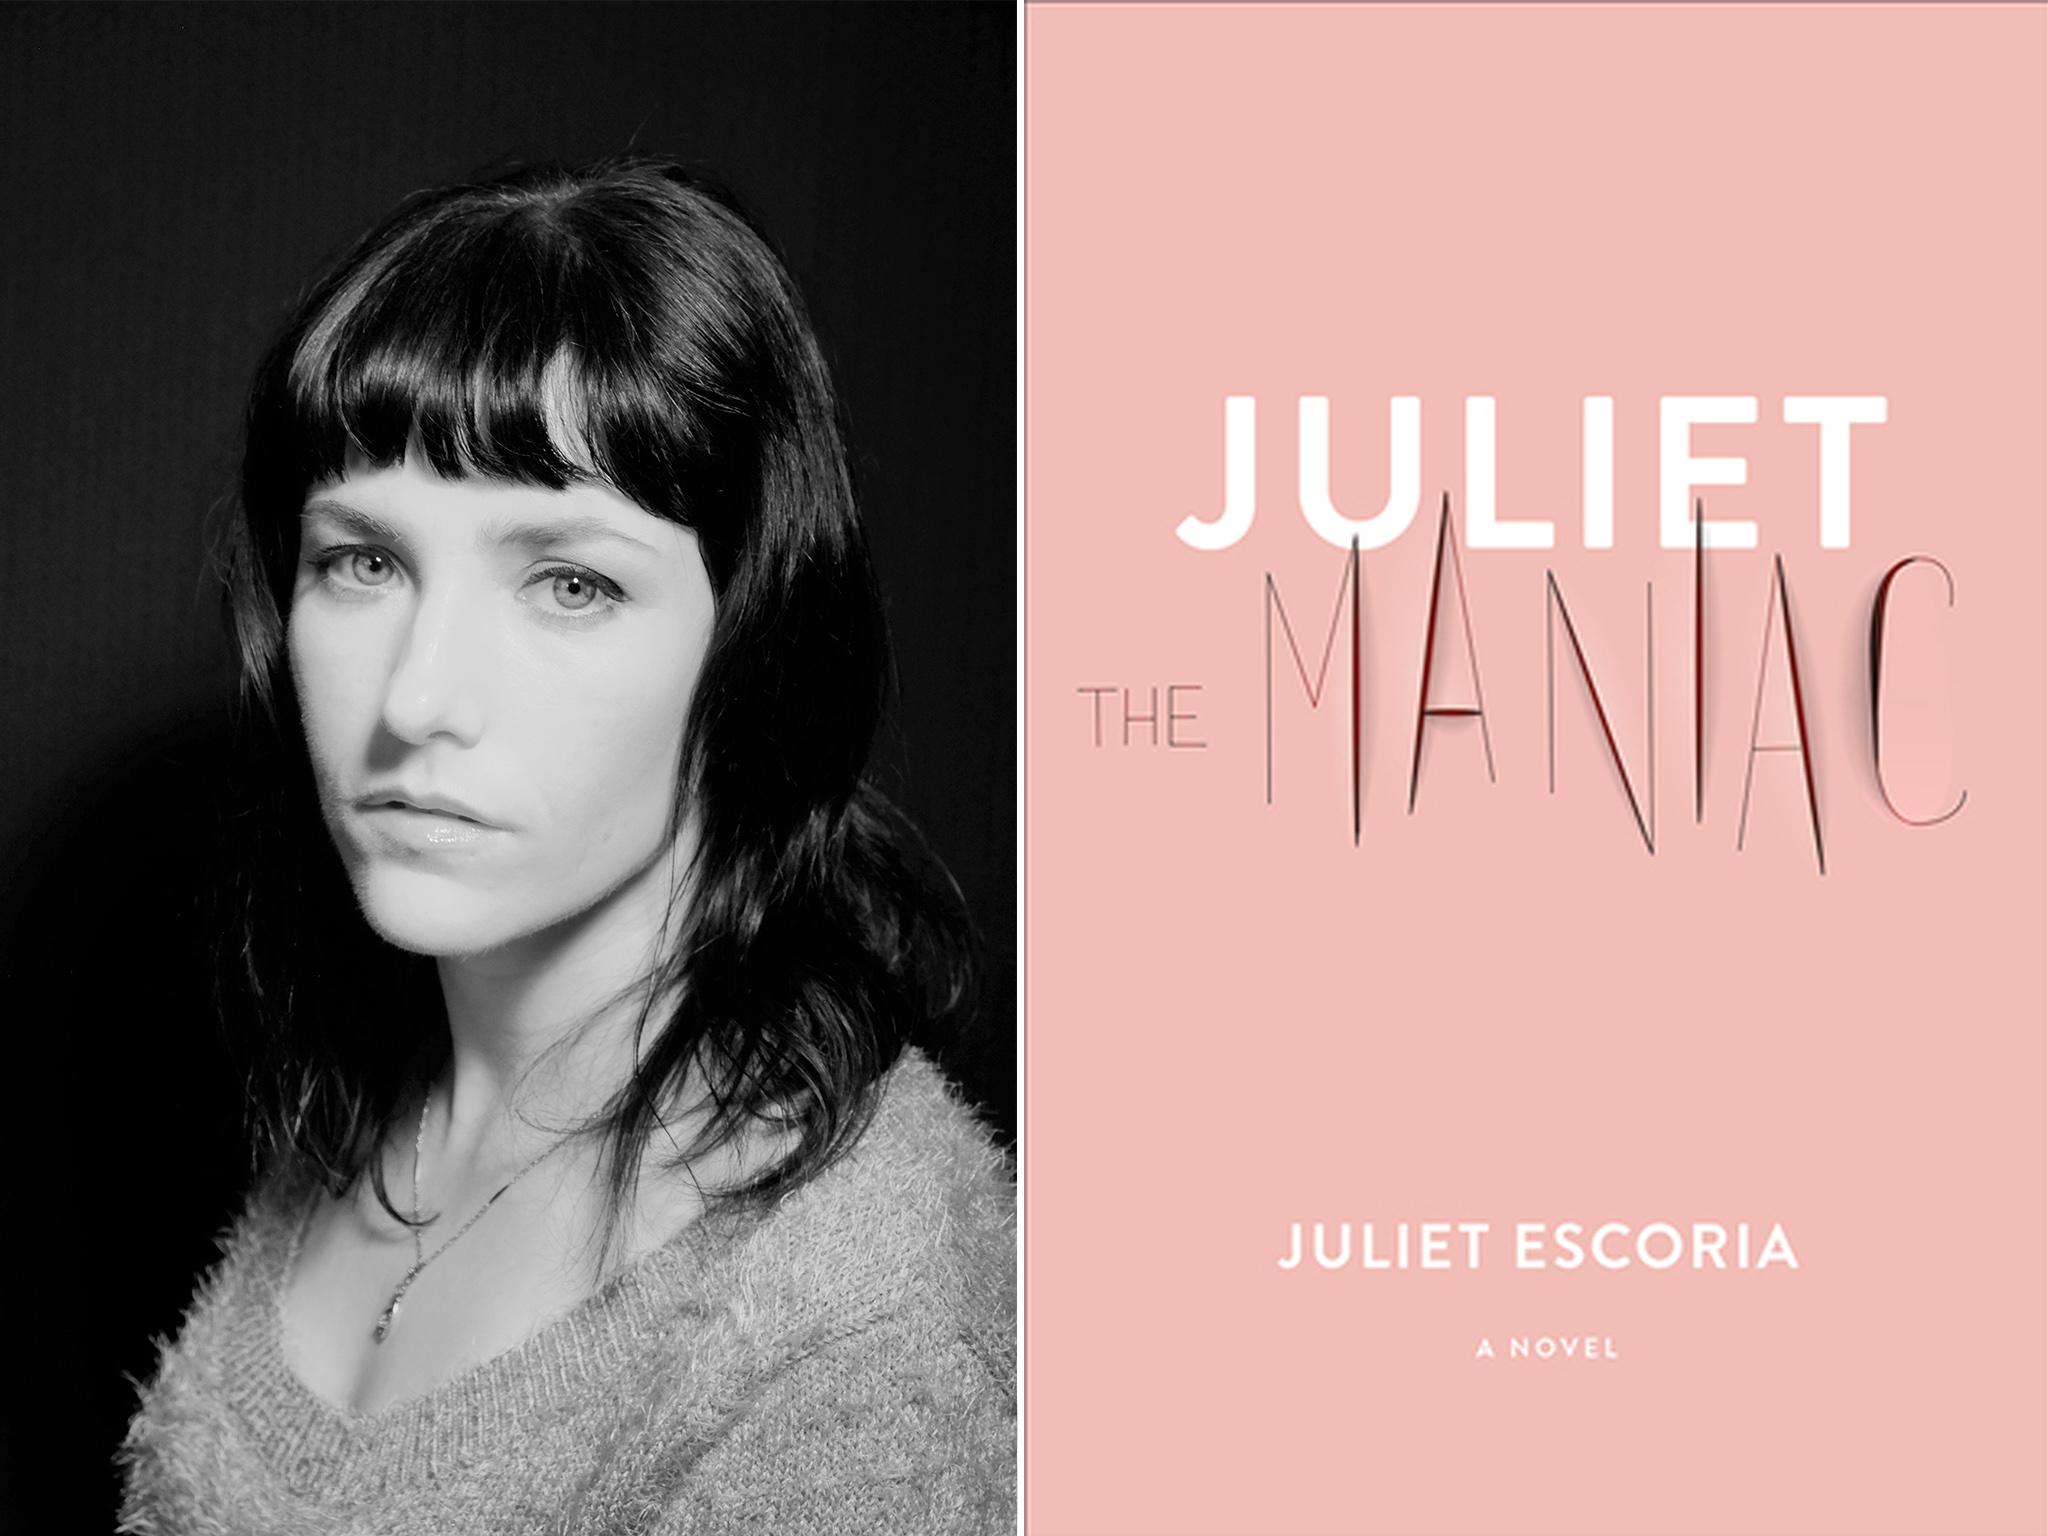 Juliet the Maniac by Juliet Escoria, review A startlingly honest tale of mental illness and addiction The Independent The Independent